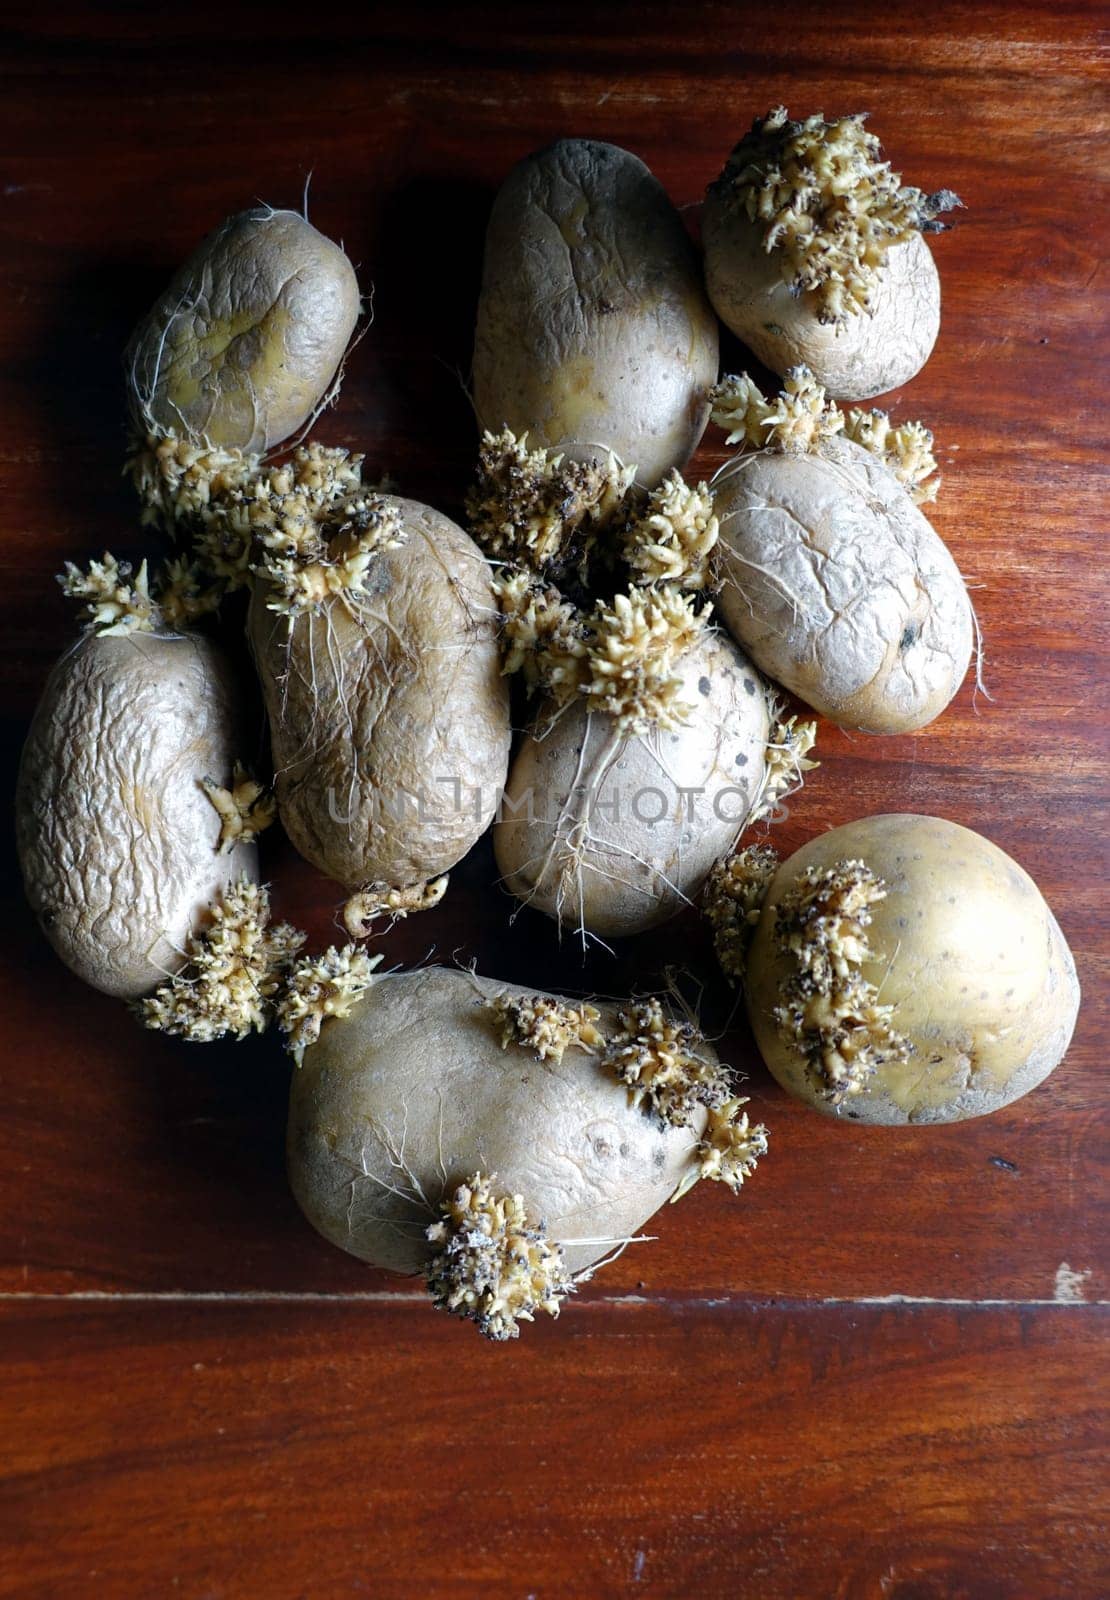 Some old, wrinkled potatoes on the wooden table that are sprouting.